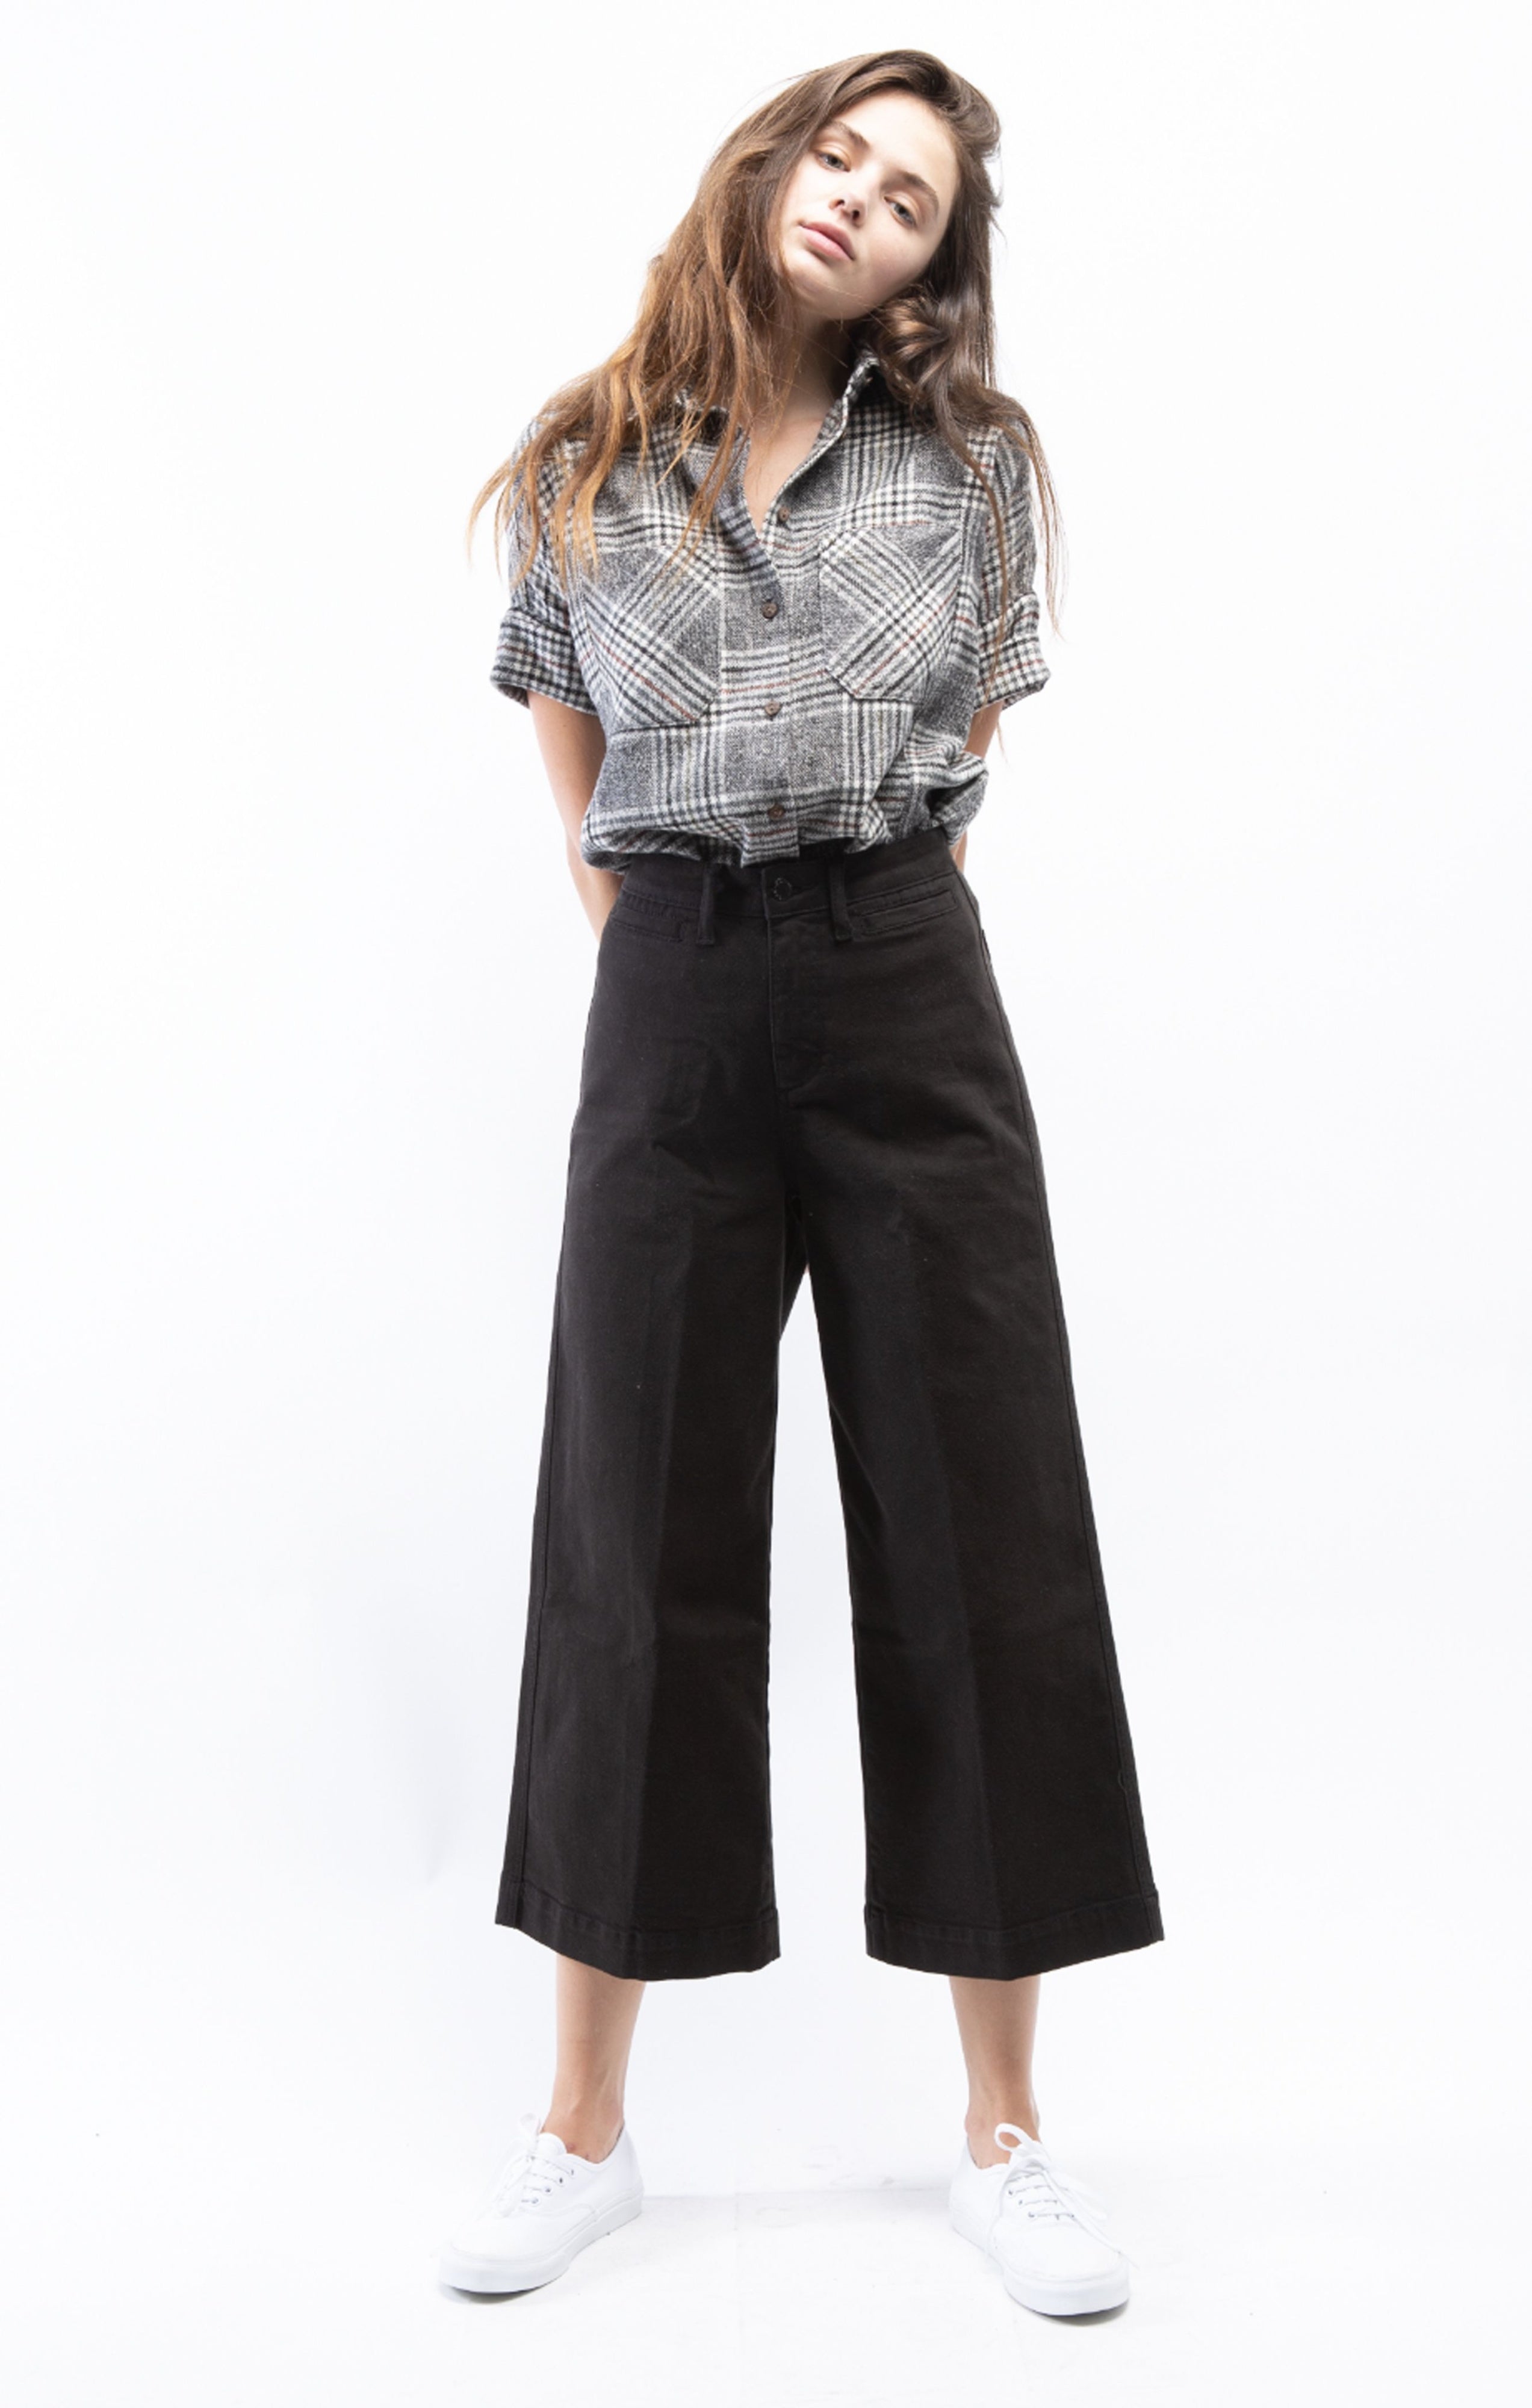 MERCER STRETCH CROPPED ZIP FRONT FLARE PANT